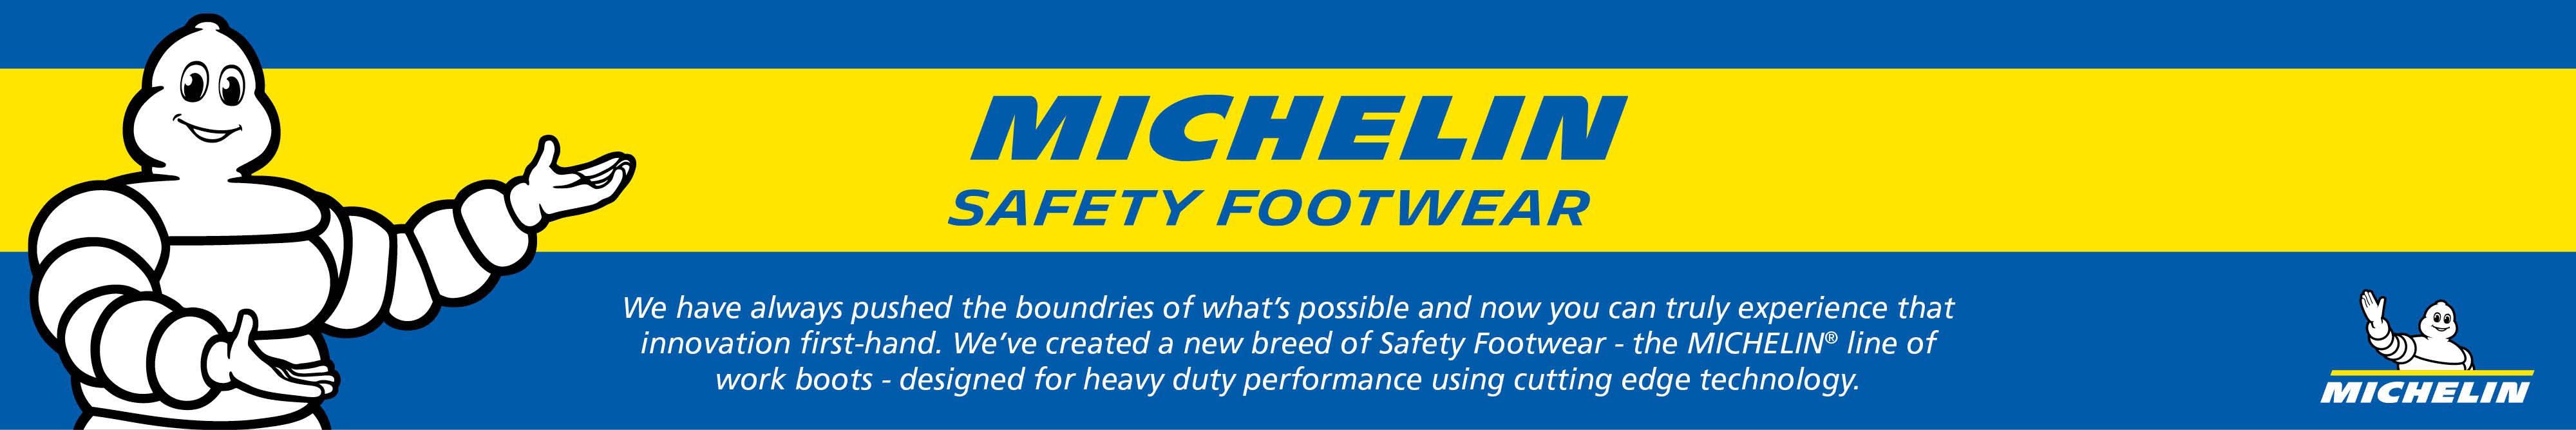 Michelin Safety Footwear Logo: 'We have always pushed the boundaries of what’s possible and now you can truly experience that innovation first-hand. We’ve created a new breed of safety footwear – the MICHELIN® line of work boots – designed for heavy duty performance using cutting edge technology.'